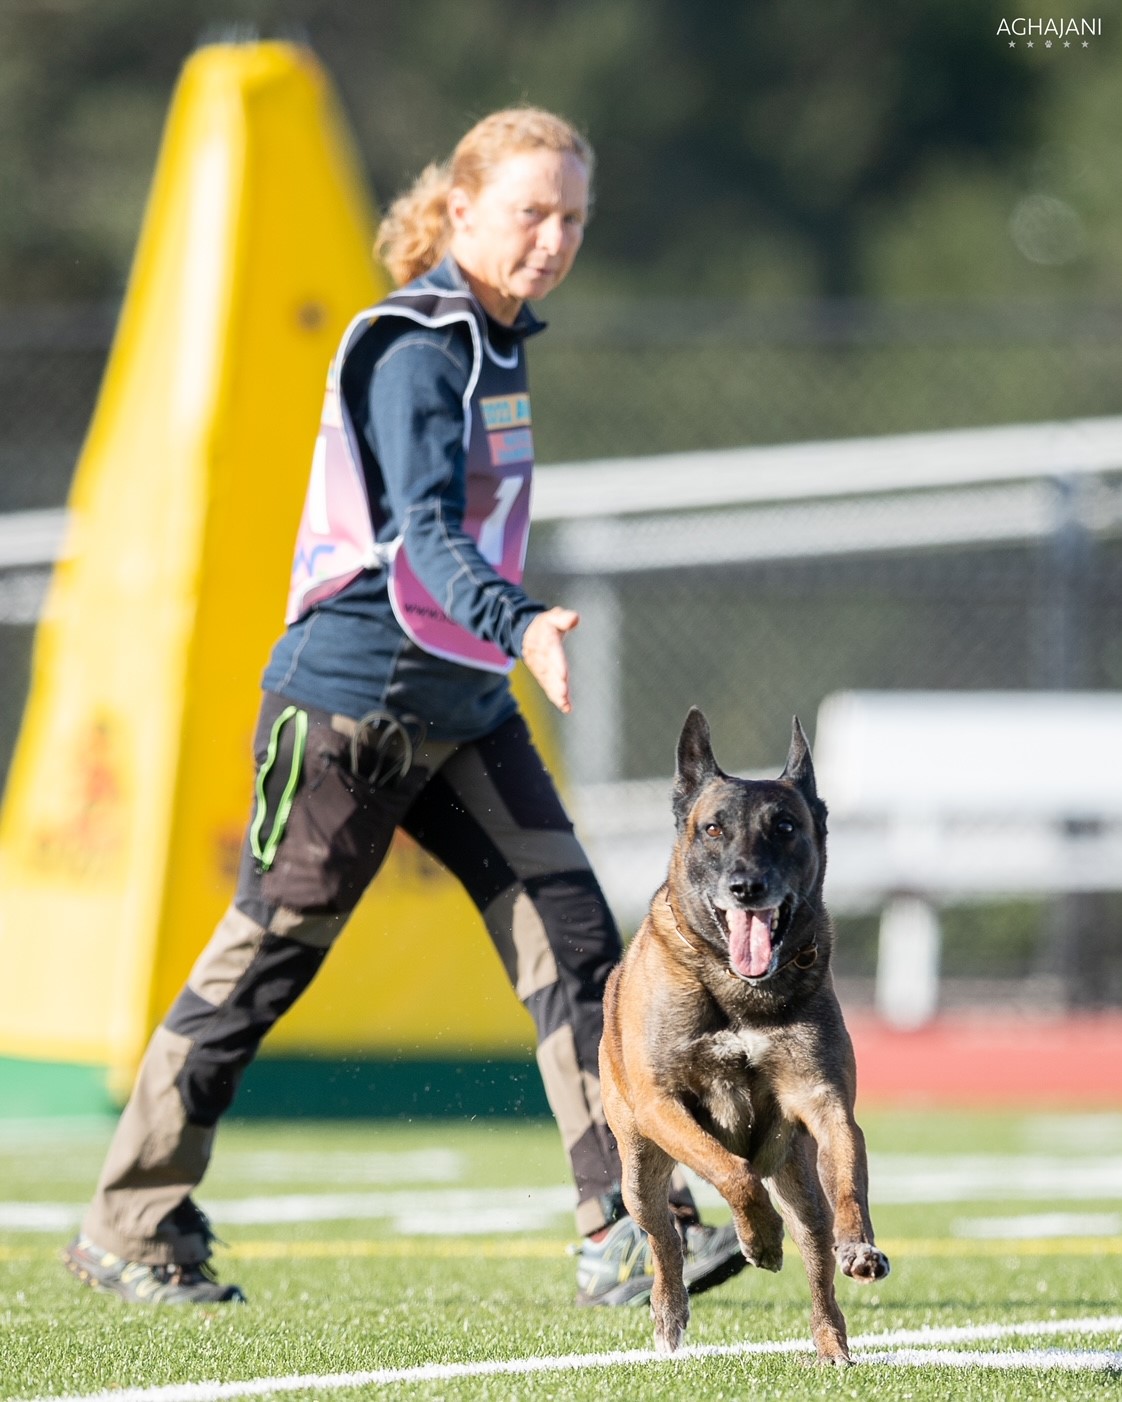 Trisha Harper and Einstein search a field for the bad guy in the American Working Malinois Association National Championships. (Photo by Brian Aghajani)